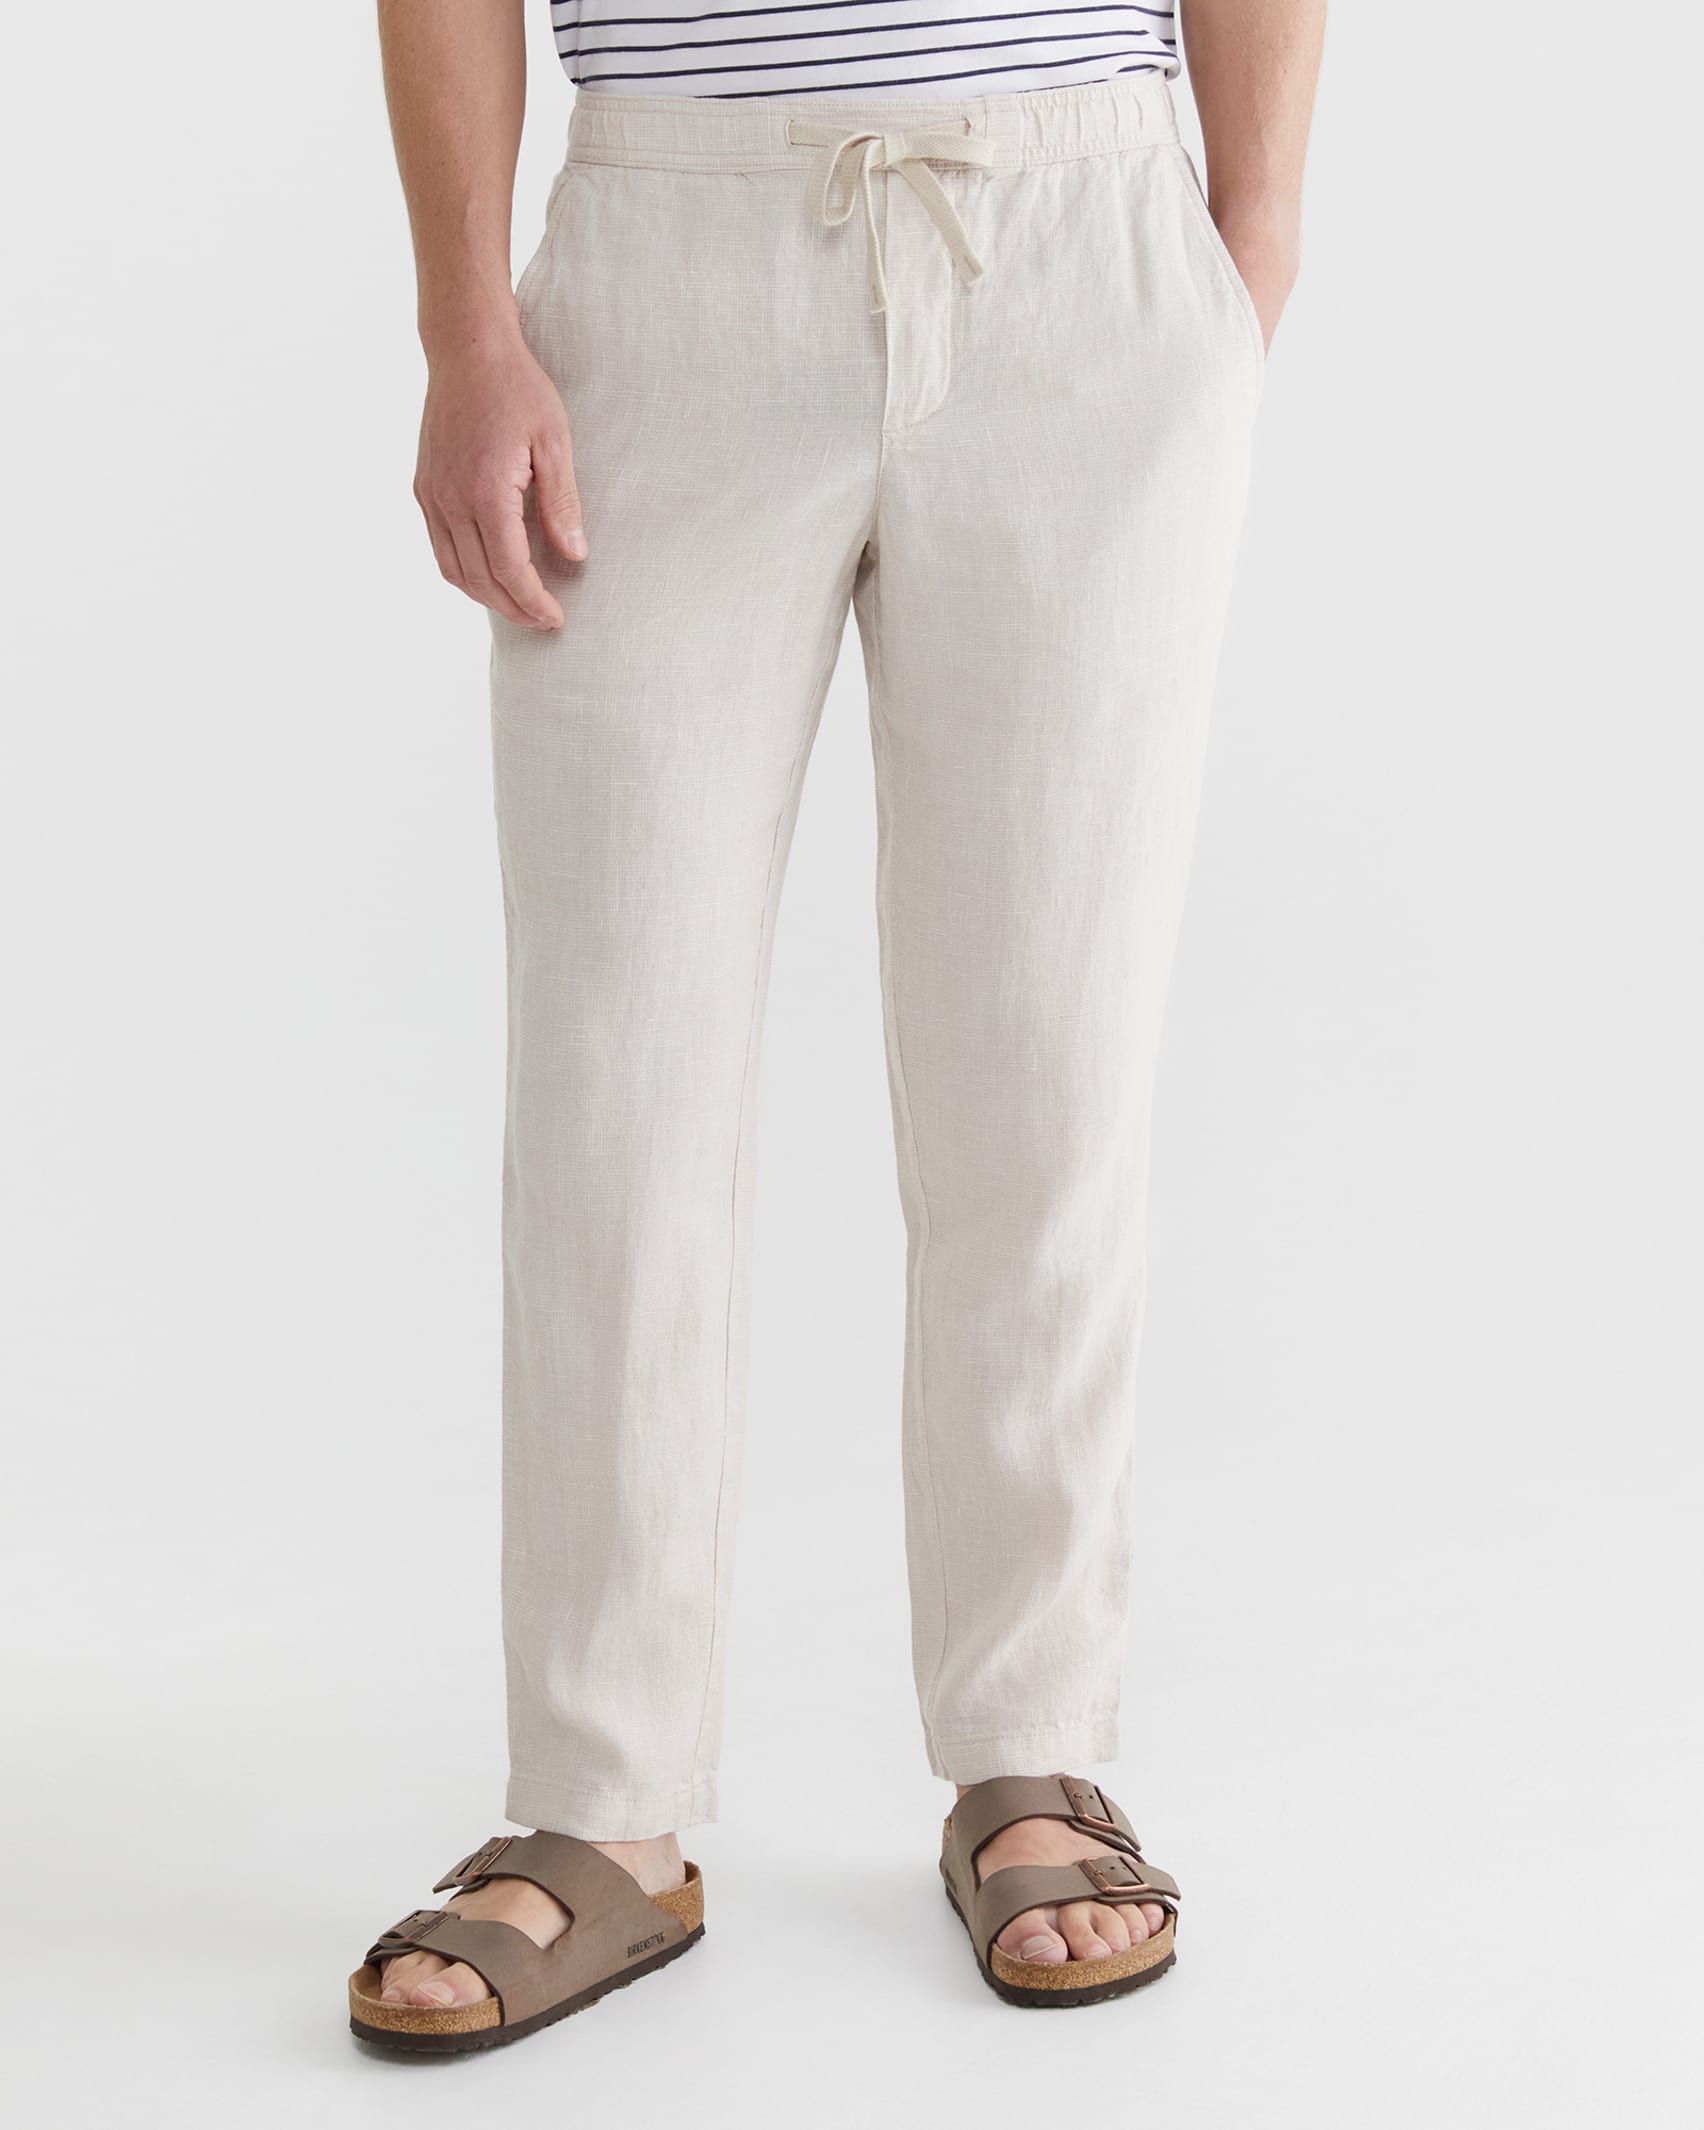 Caffery Linen Pant in SAND